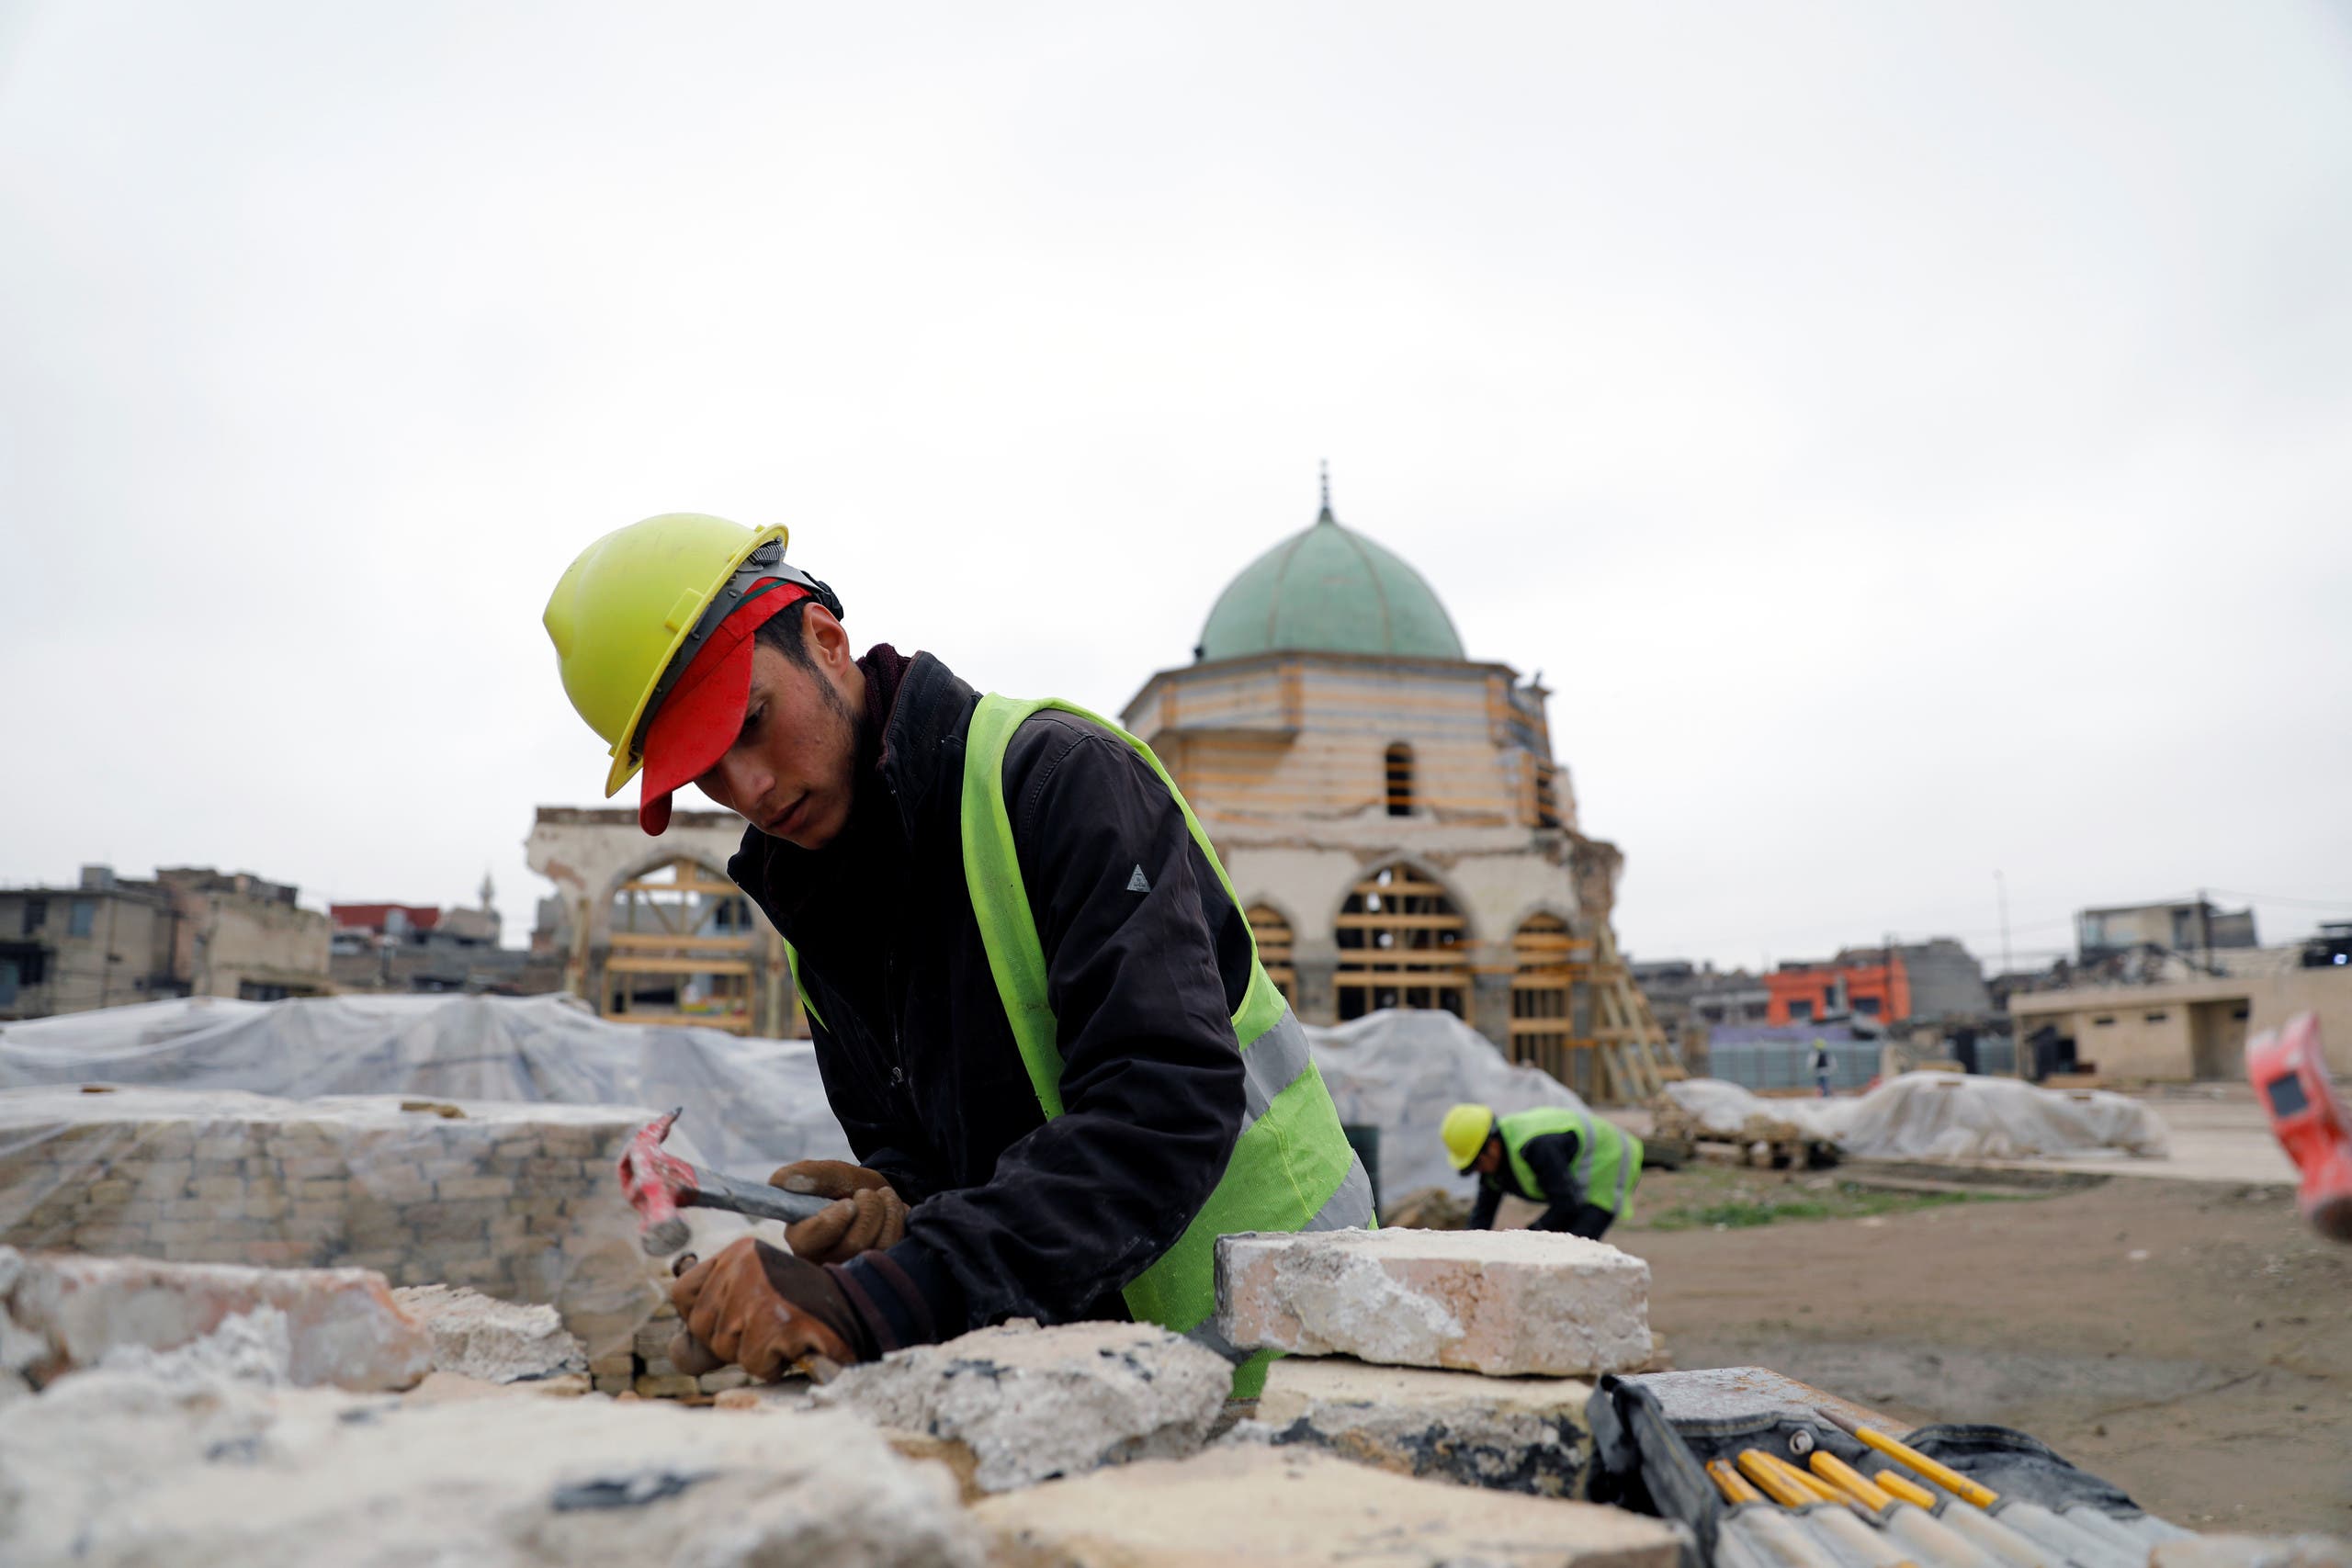 A laborer cleans a rock during the re-construction of the Grand al-Nuri mosque, in the old city of Mosul, Iraq January 23, 2020. Picture taken January 23, 2020. (Reuters)